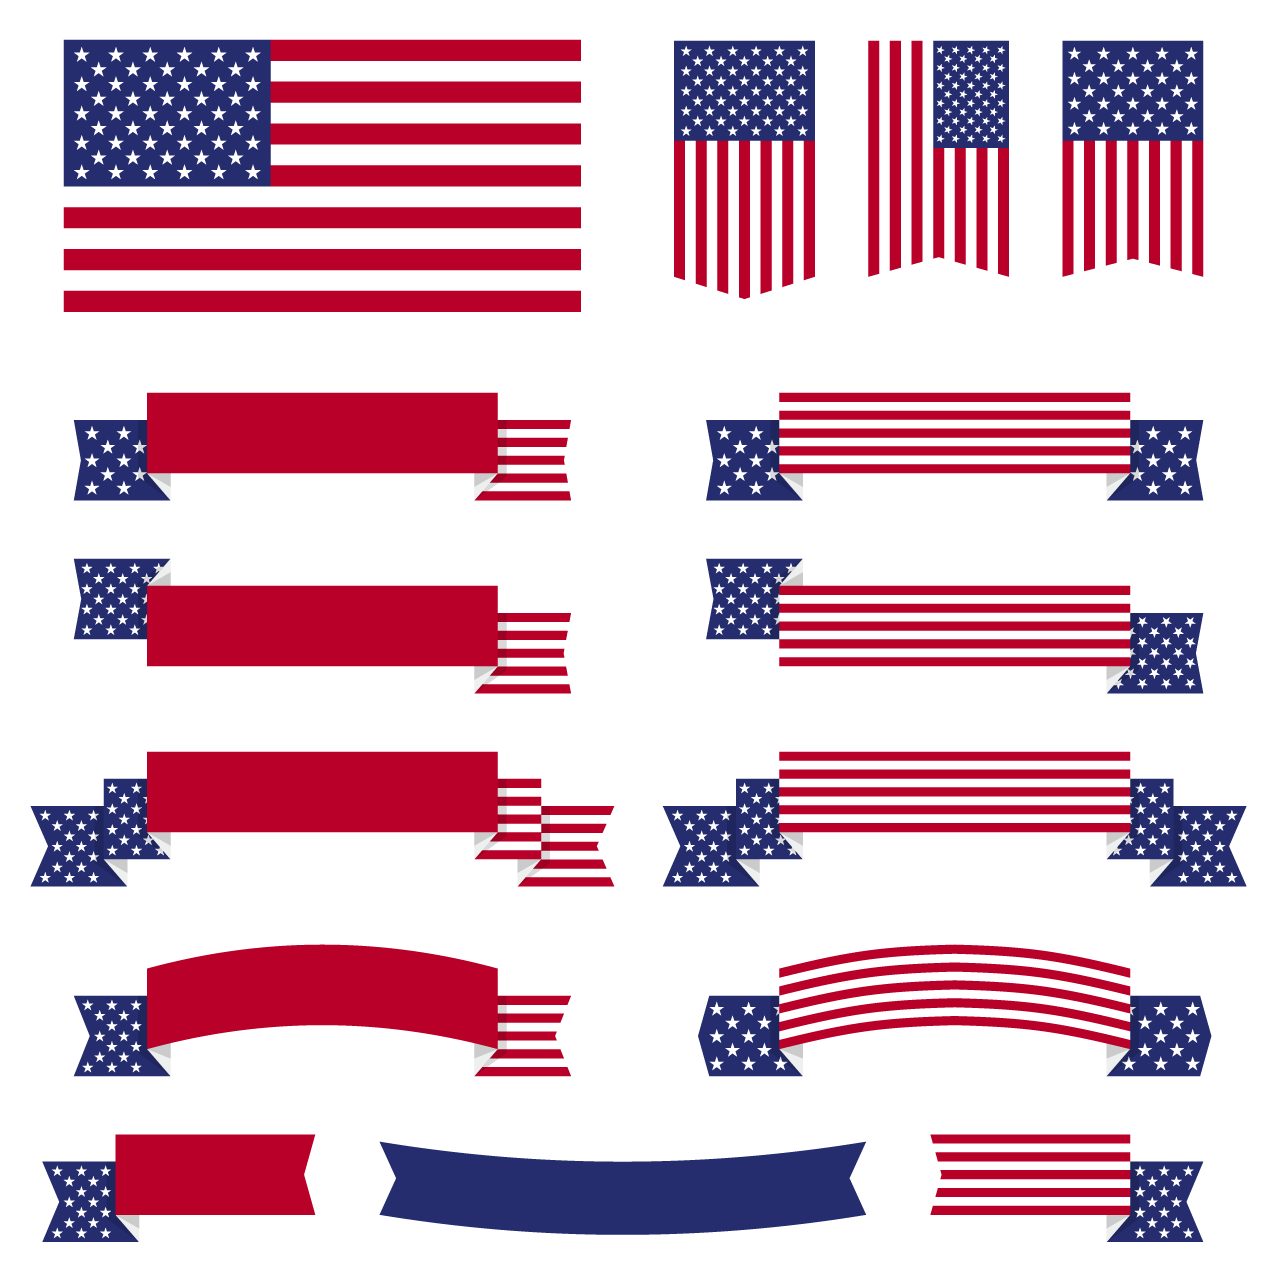 Ribbon banner clipart red white blue american flag ribbons banners transparent background png